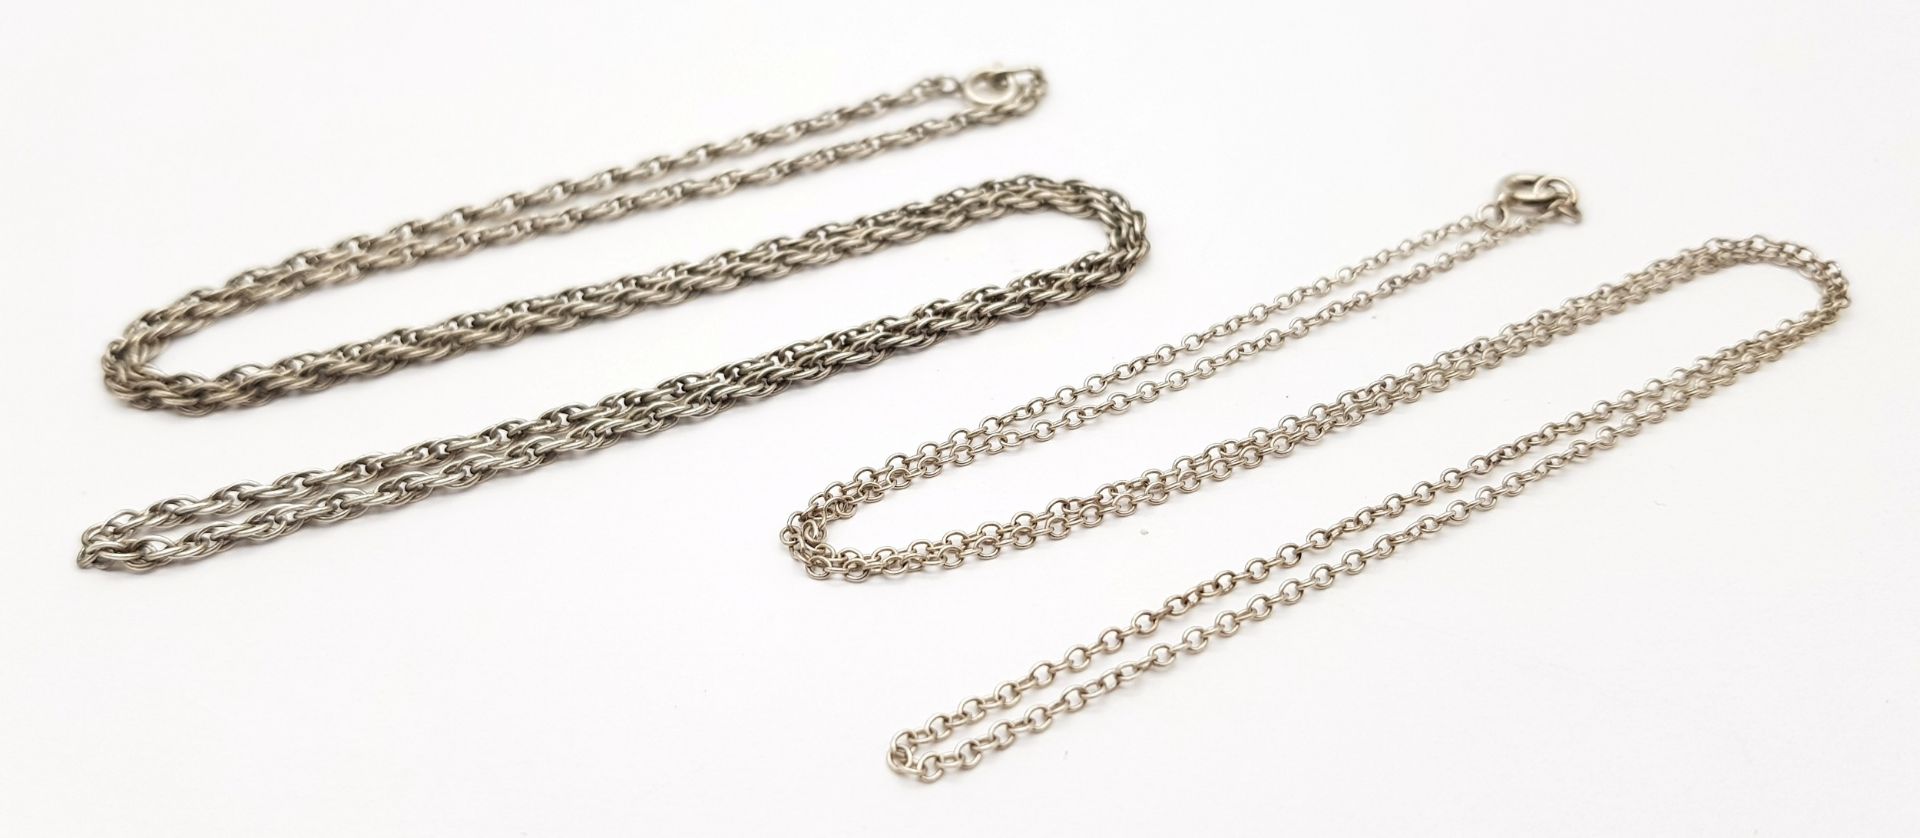 Two 925 Silver Necklaces. Both 54cm